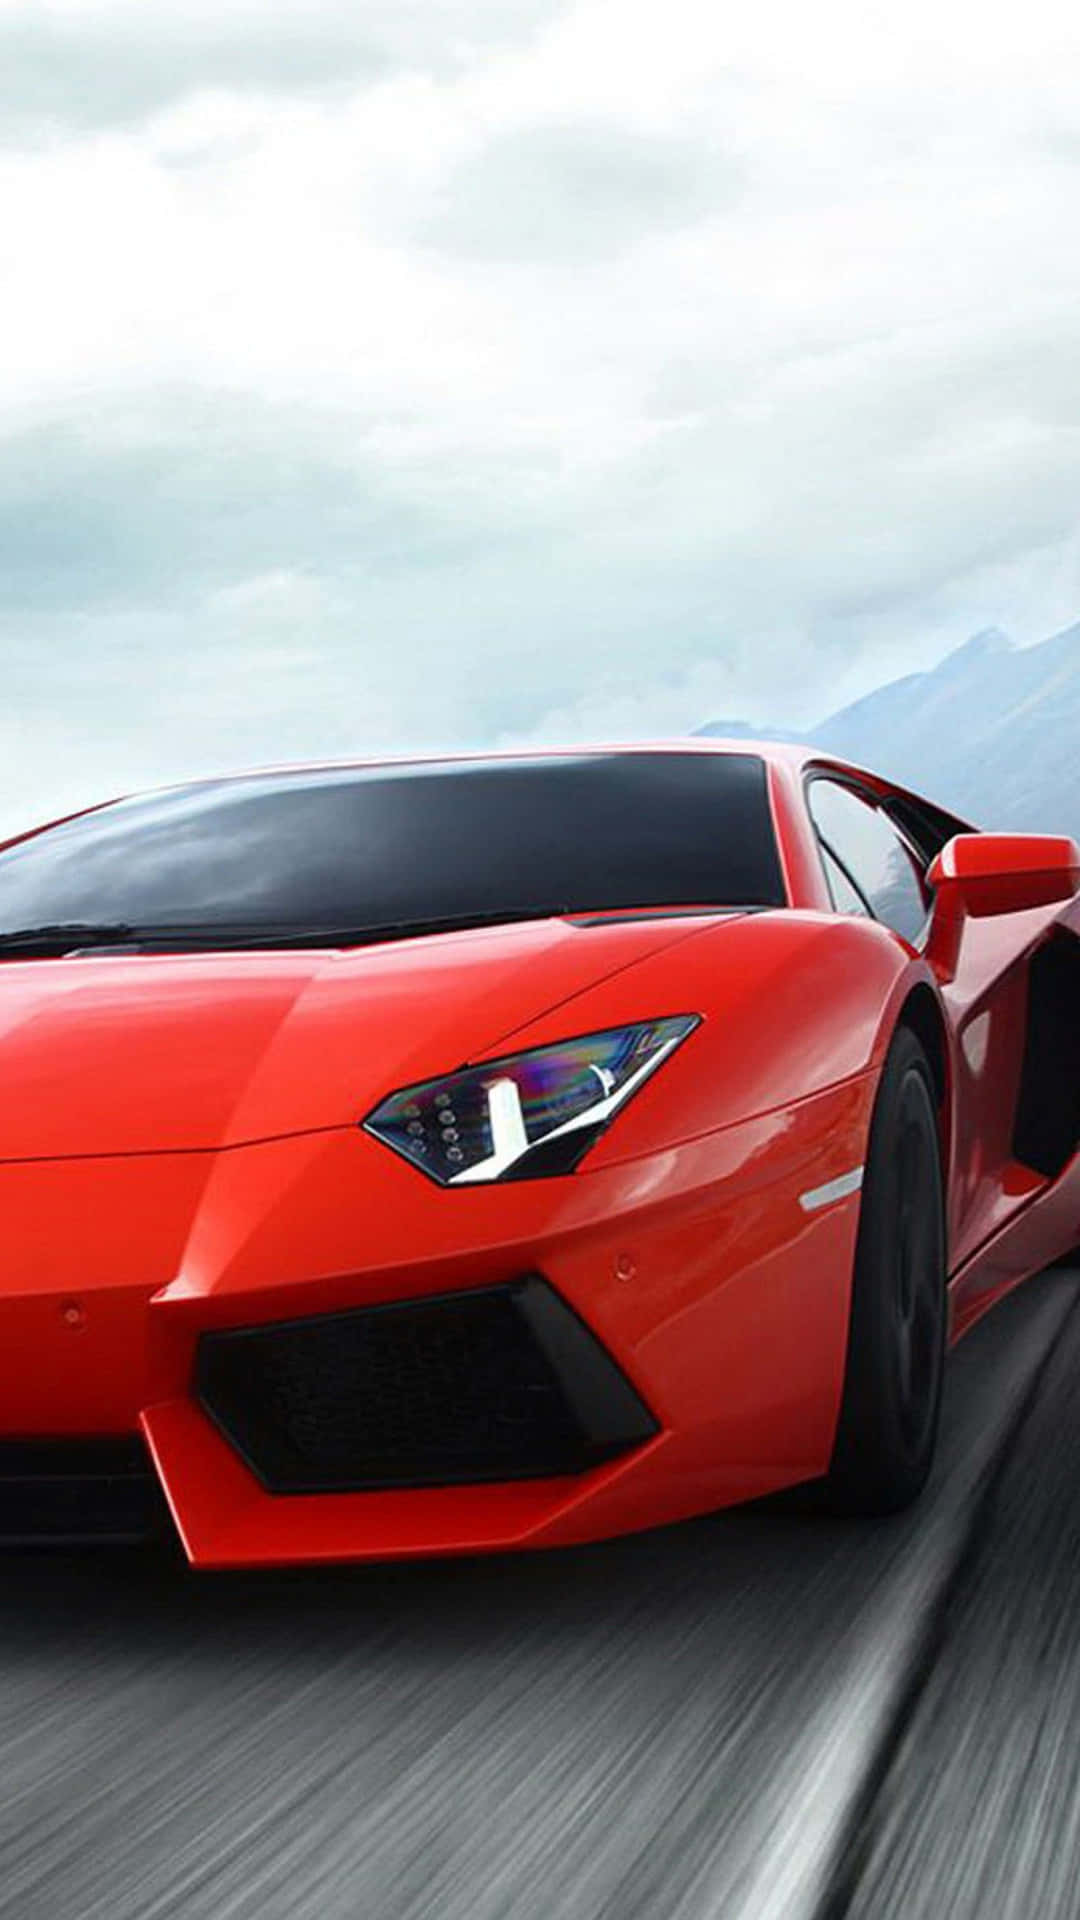 Iphone Xs Max Project Cars 2 Red 2012 Lamborghini Aventador Background